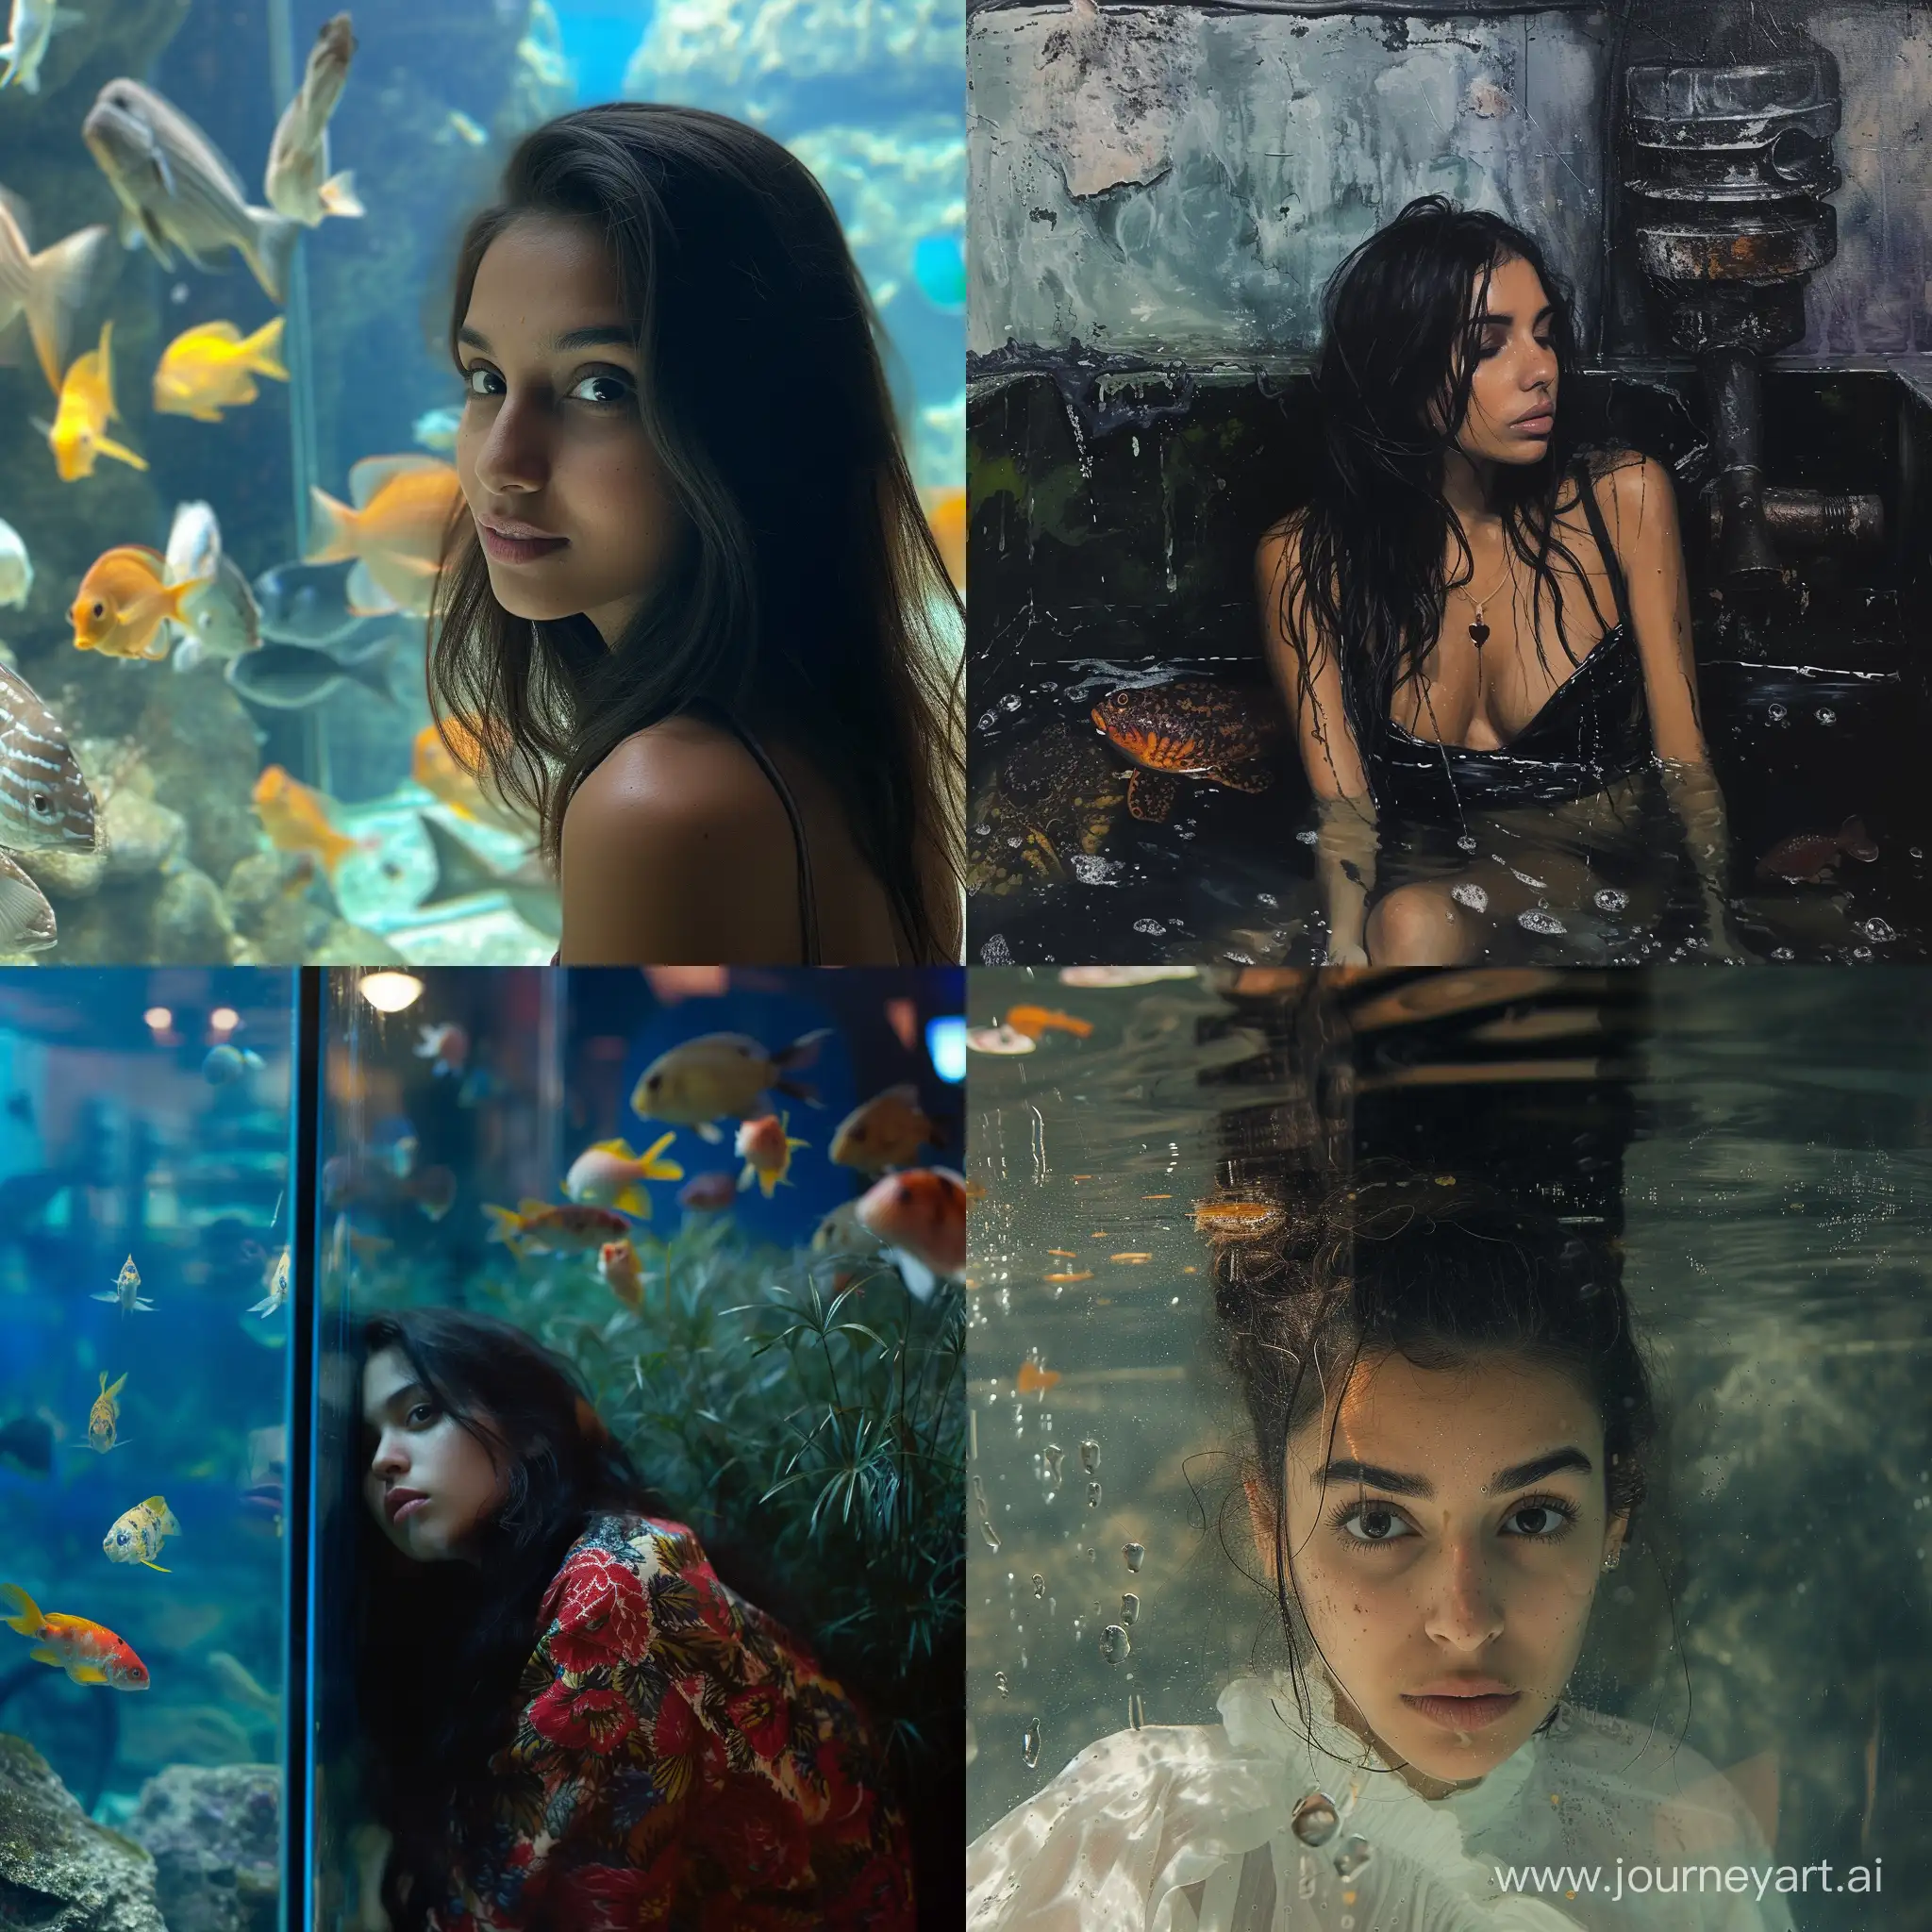 Leyla-Immersed-in-Tank-with-Vivid-Visuals